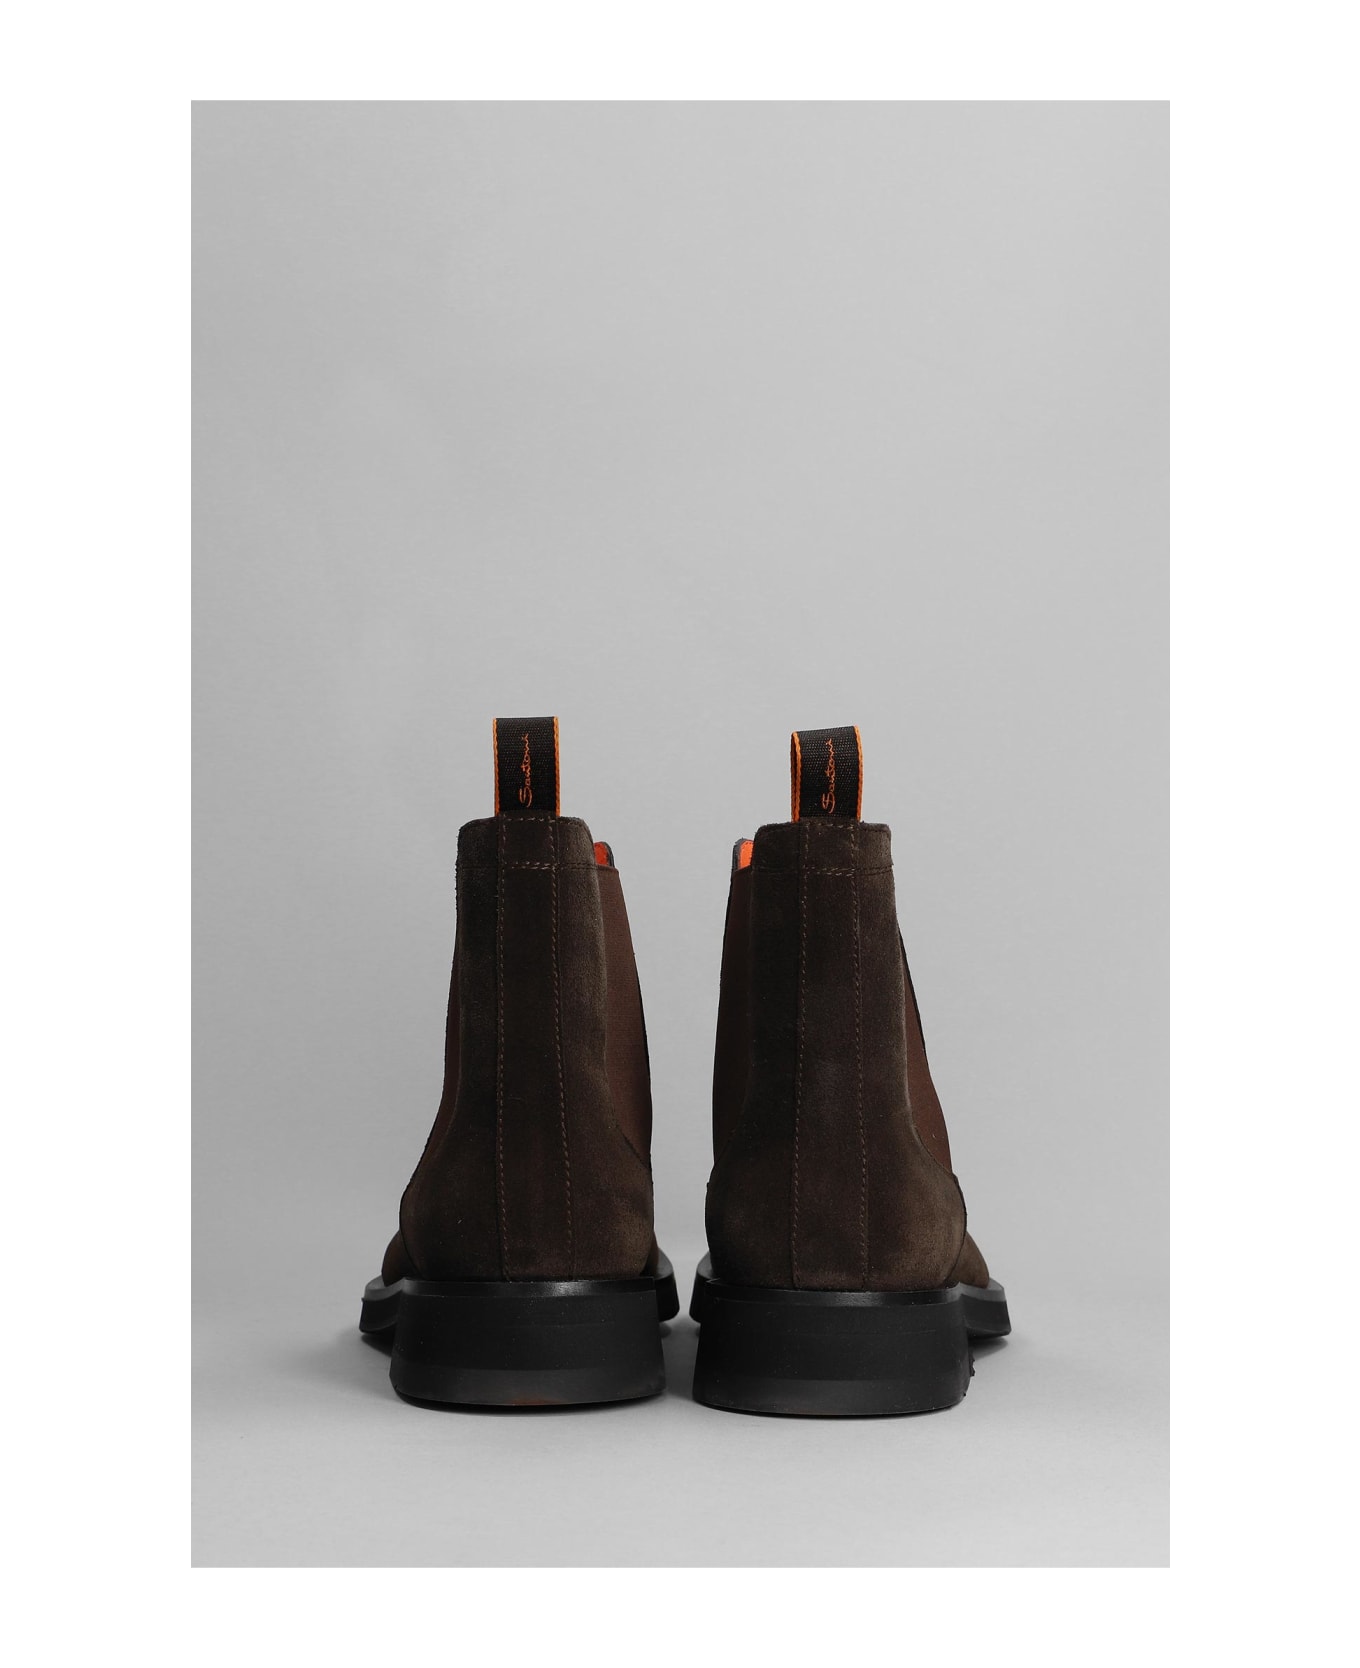 Santoni Deliver Ankle Boots In Brown Suede - brown